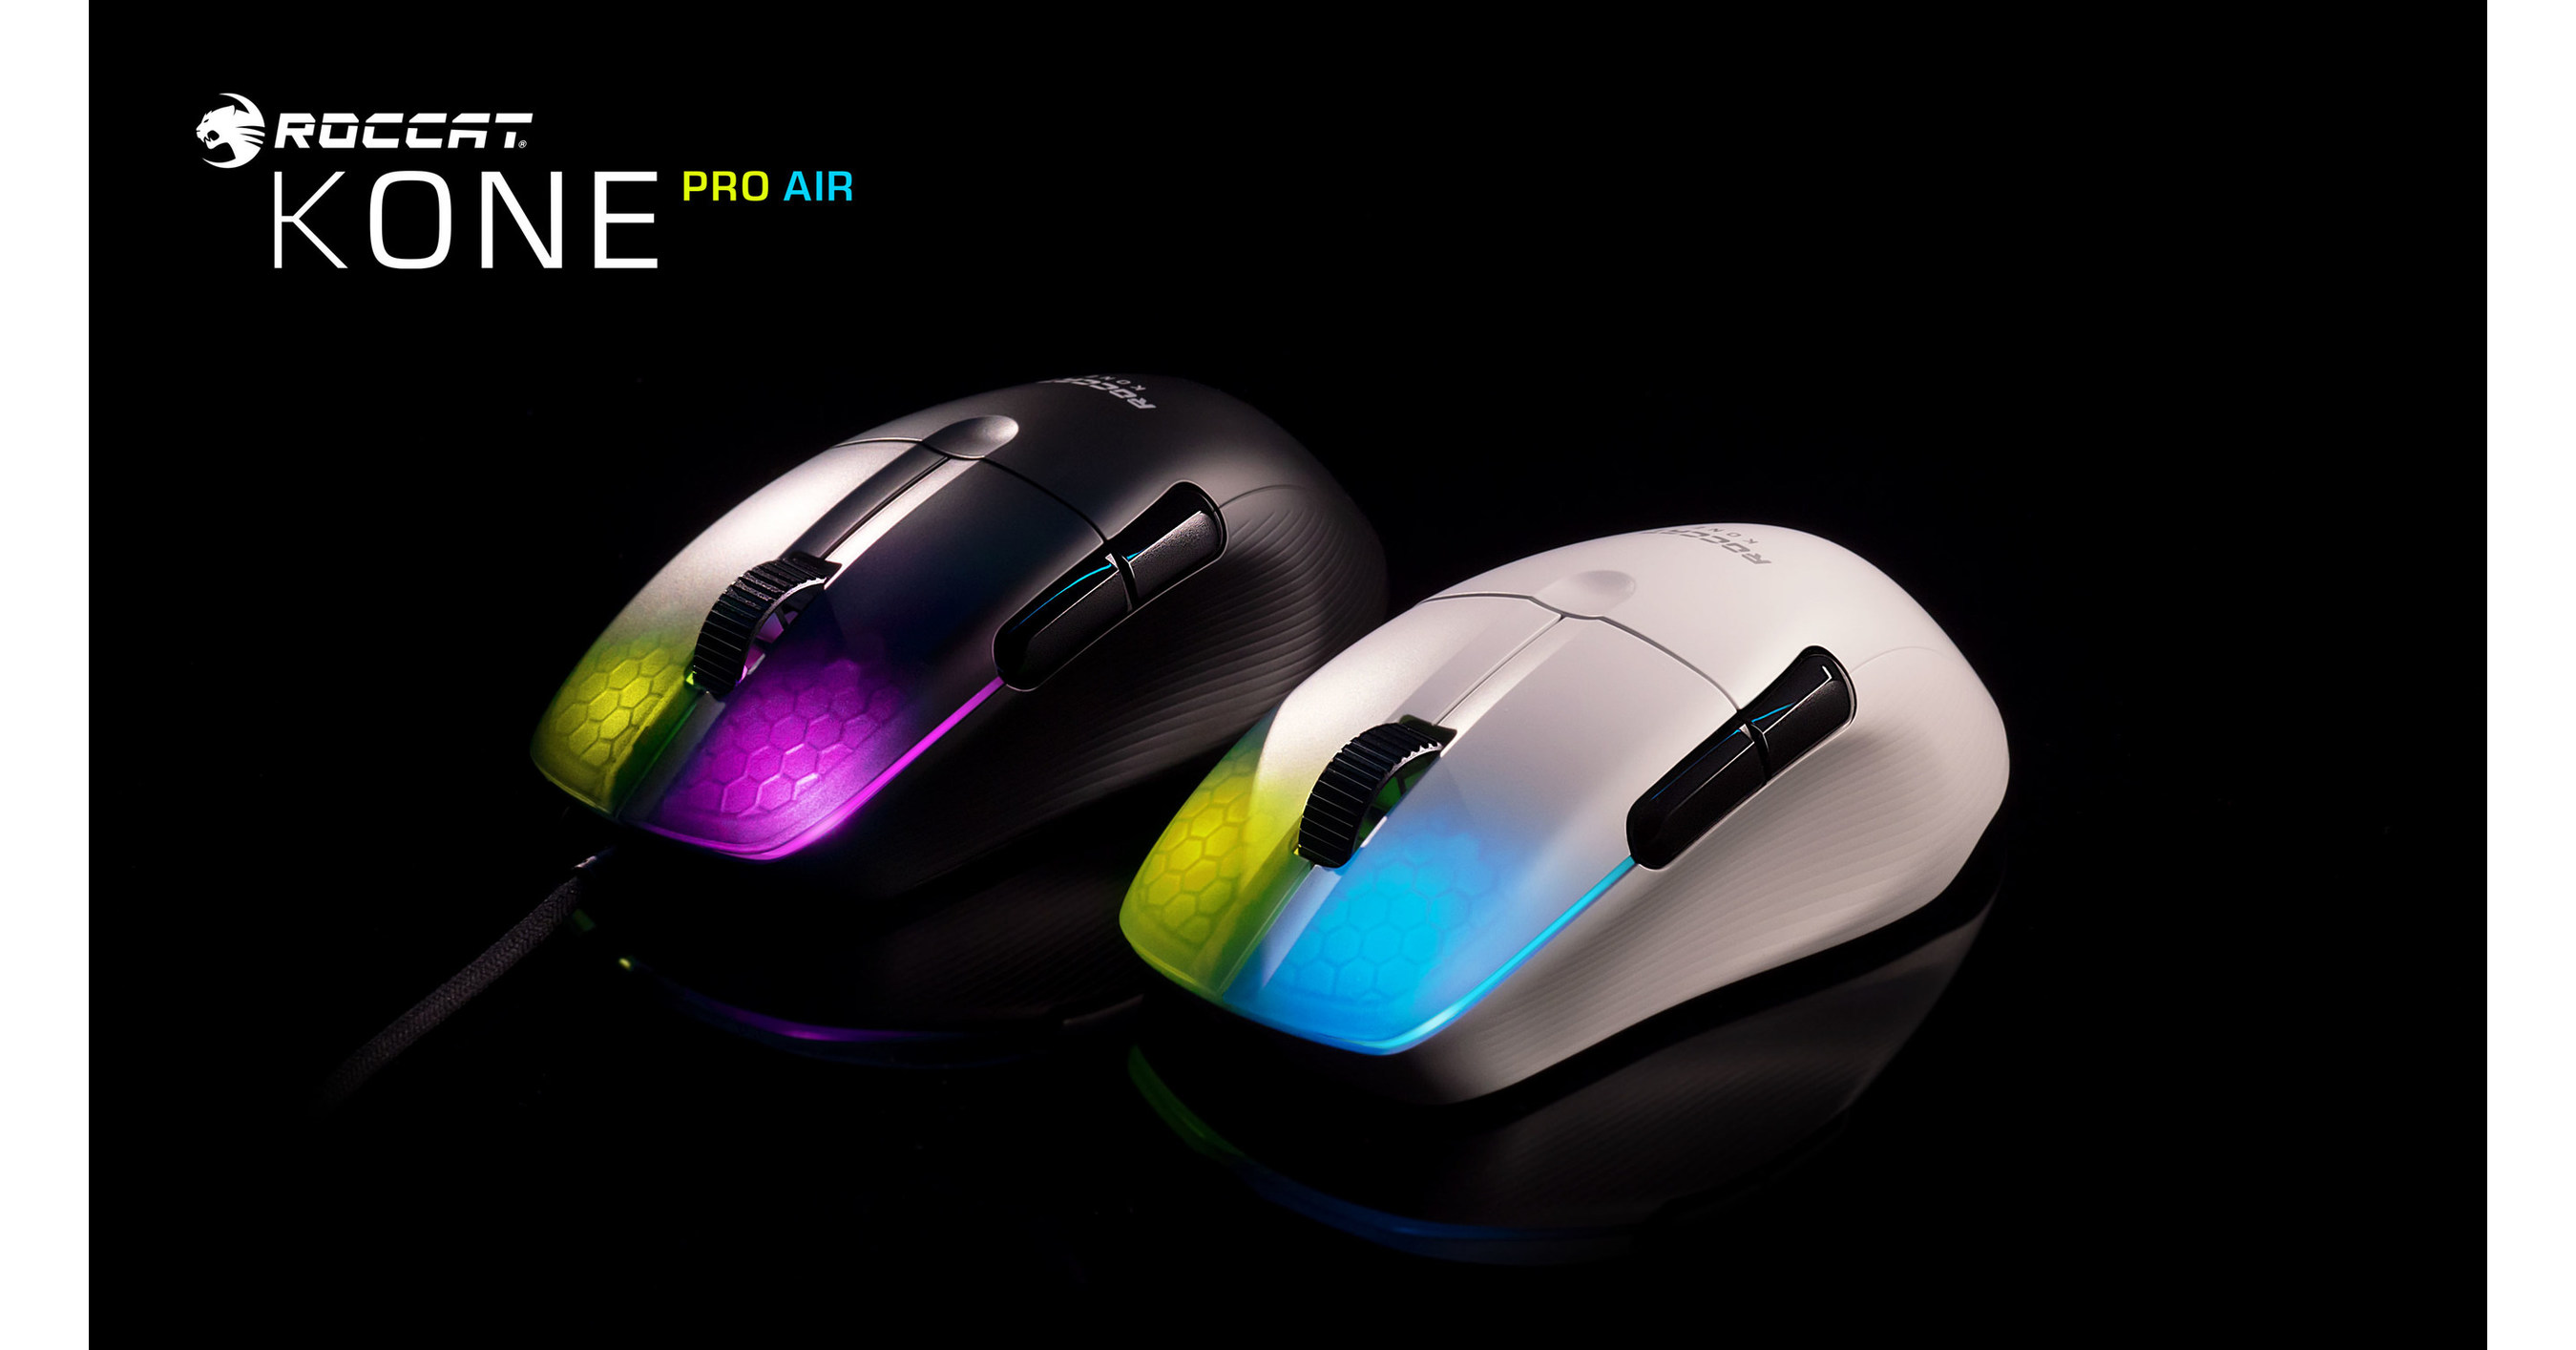 The All New Kone Pro Pc Gaming Mice Roccat S Most Pre Ordered Product Ever Now Available Worldwide